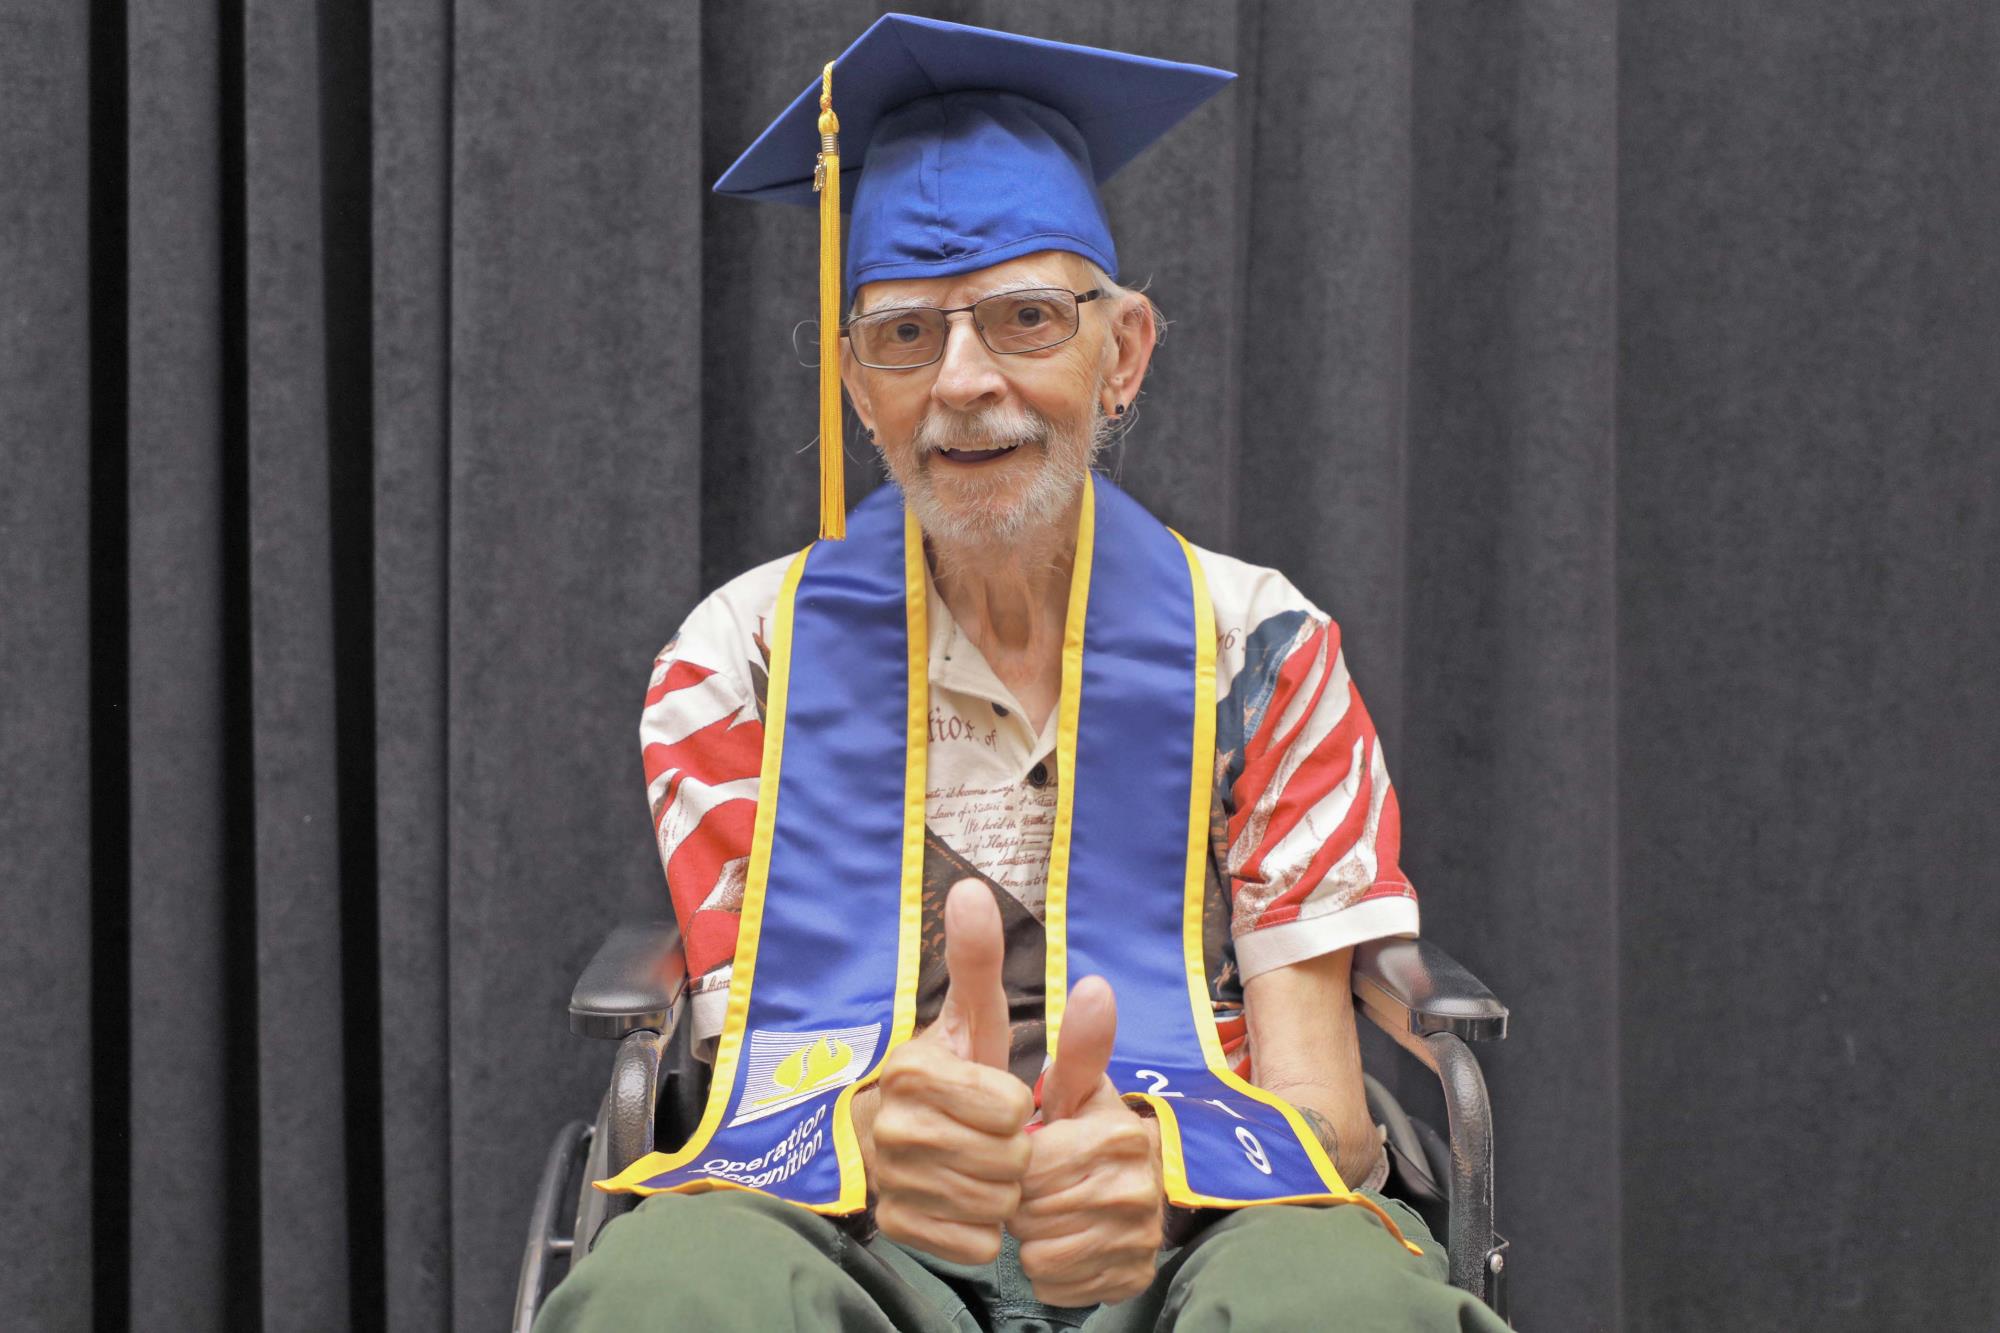 Veteran Franklin Stevens in graduation gear gives a double thumbs up